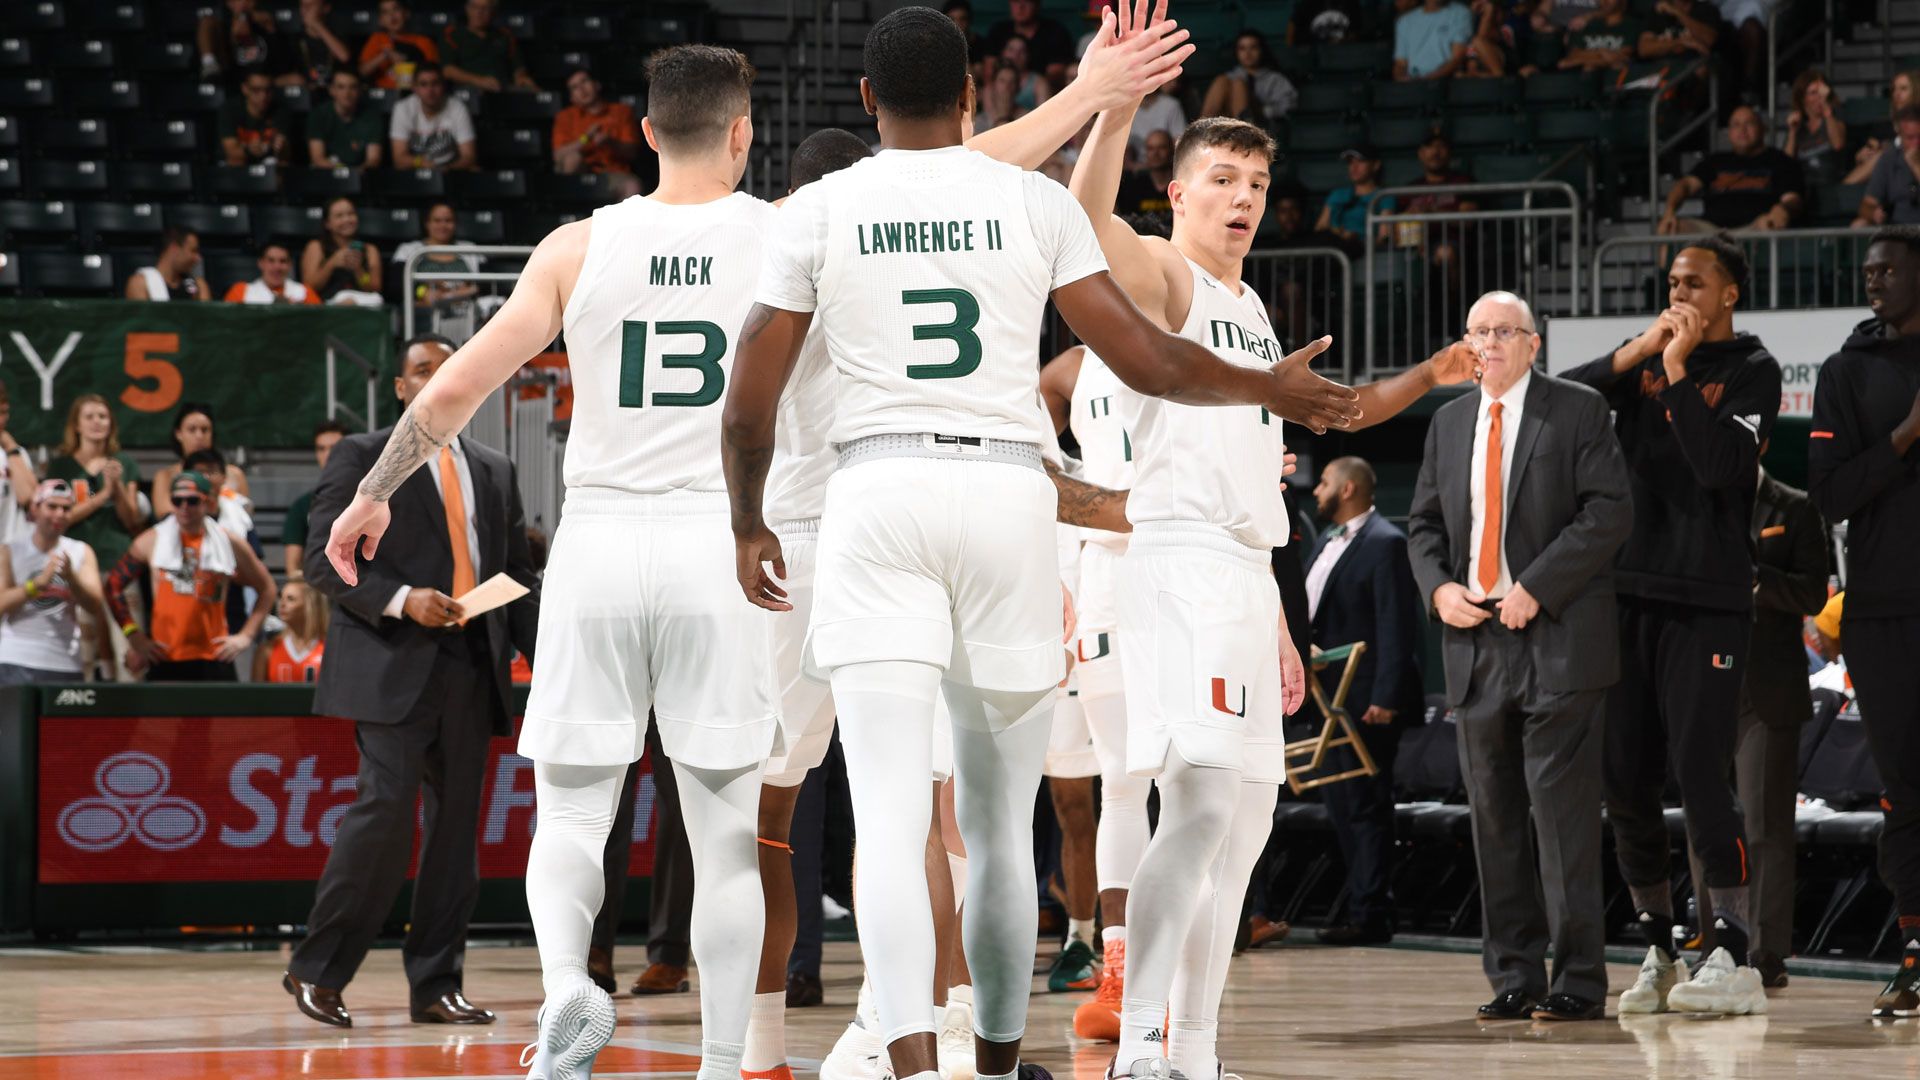 Canes Sting Yellow Jackets, 80-65